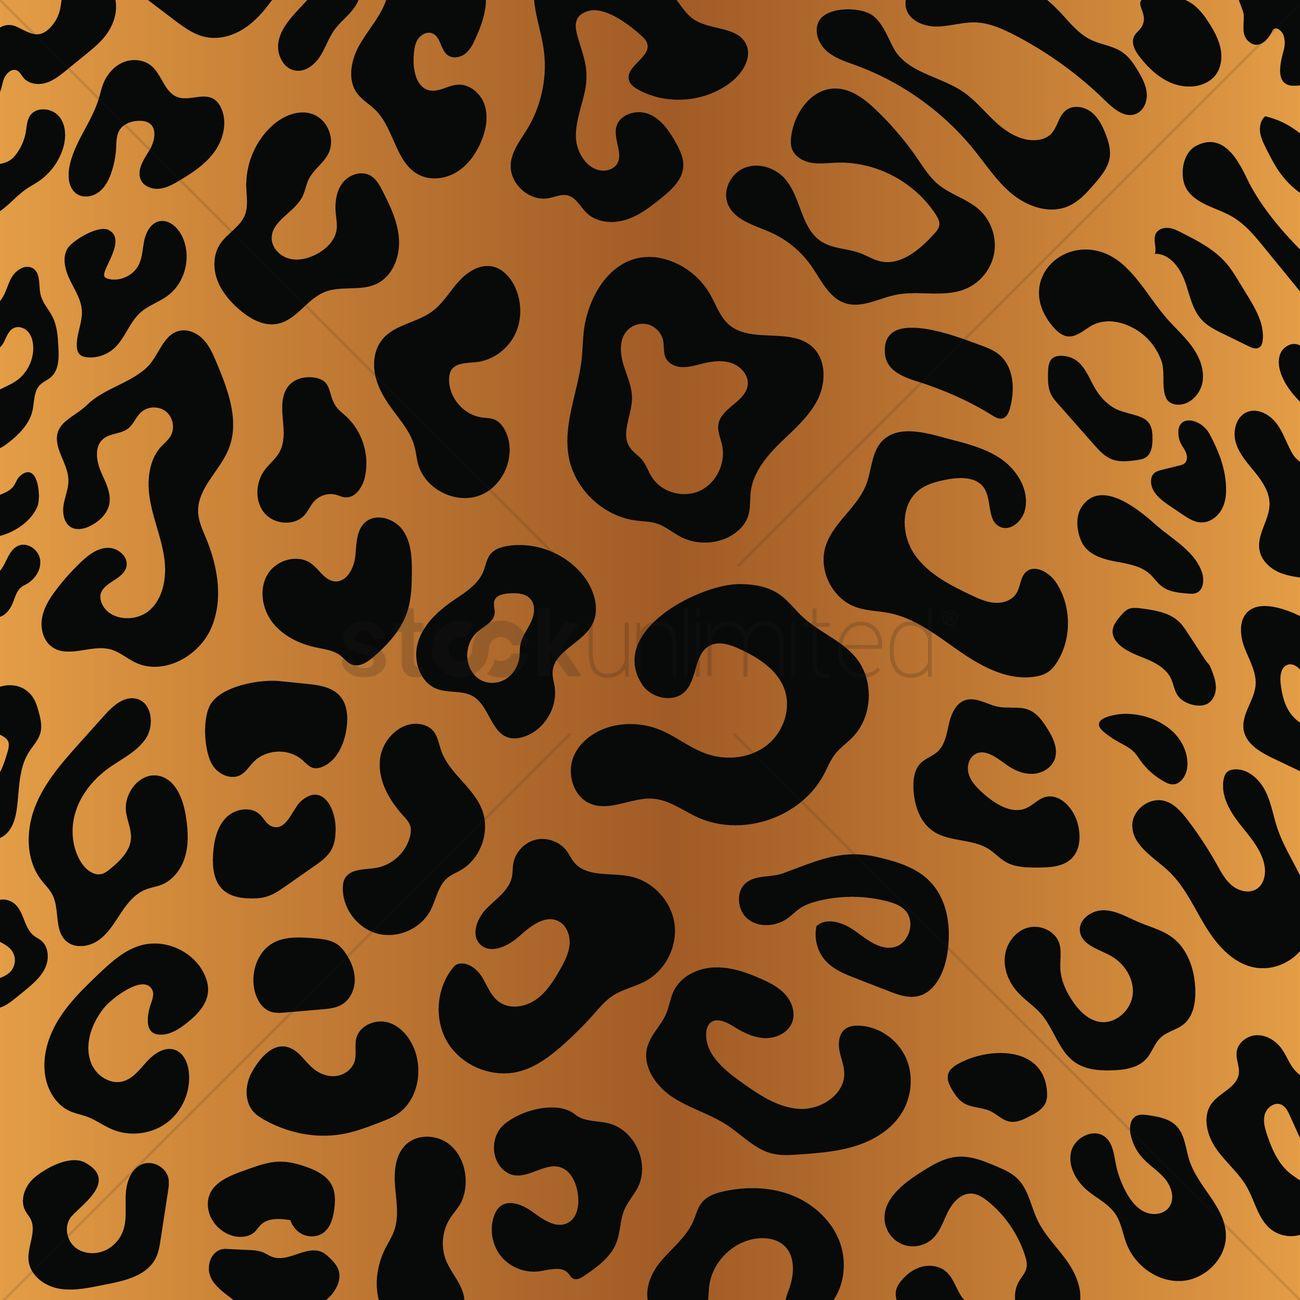 Pictures of Cheetah Print Wallpaper 55 pictures